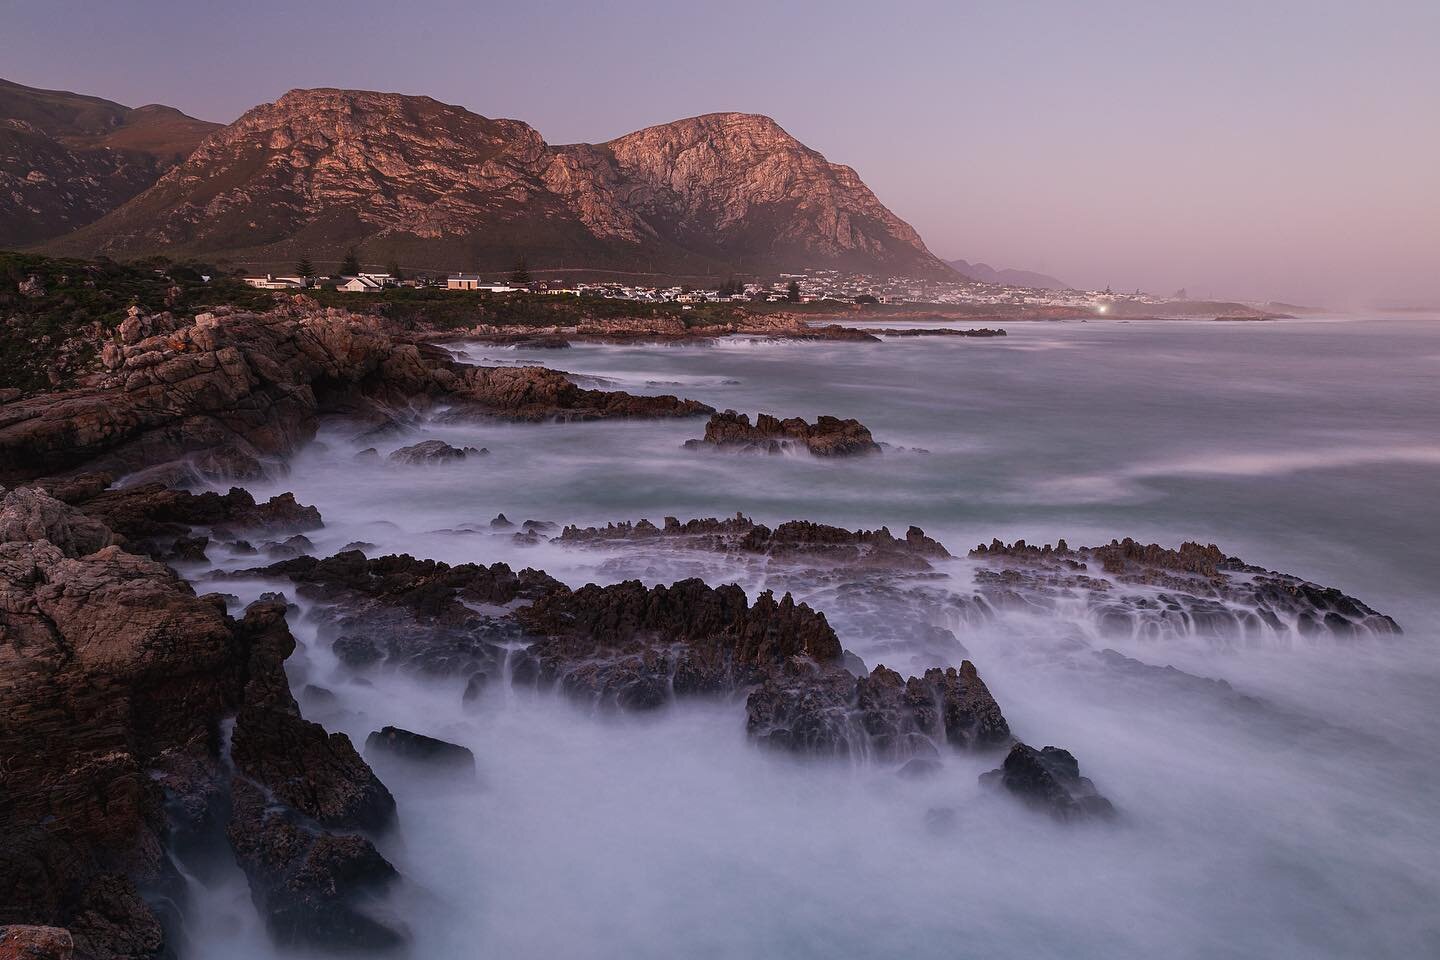 Previously unreleased prints now live! Link in bio. 

Photograph: Hermanus Afterglow 

It&rsquo;s a new year, so why not add a new limited edition artwork to the collection? 

I&rsquo;ve added eight new prints &amp; Diasec artworks to the site. These